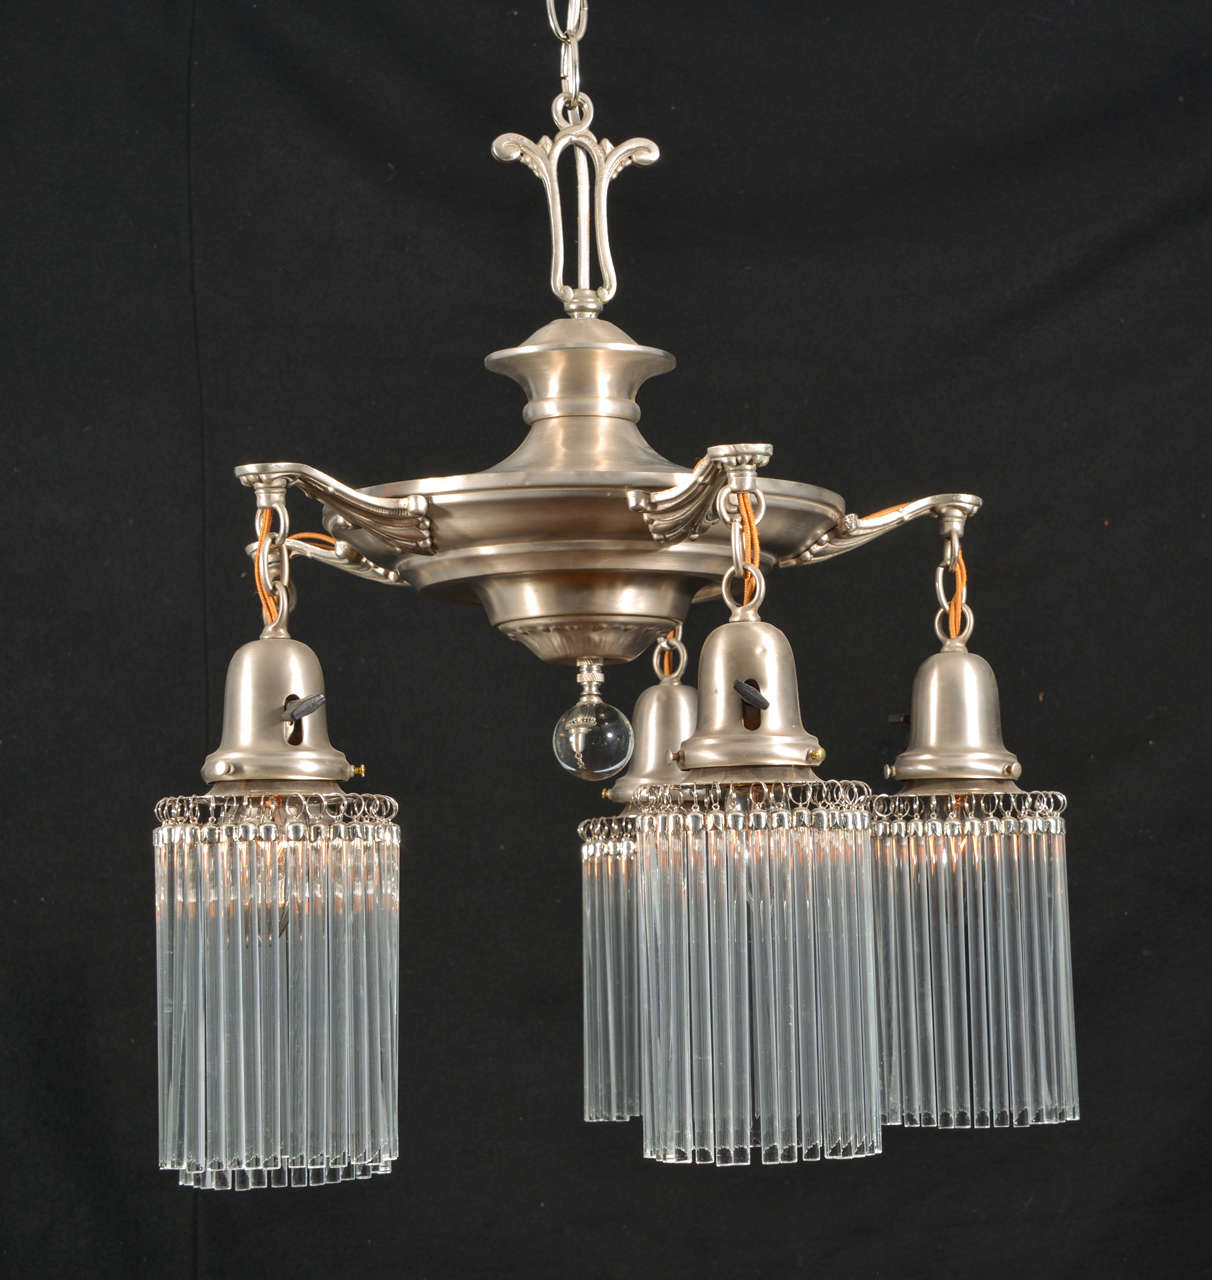 Five-light, brushed nickel finish, pan fixture with pencil type crystal from each light. New wiring and totally refinished with brushed nickel-plated finish. Typical 1930s design. Original old style sockets with turn key. The length is 40